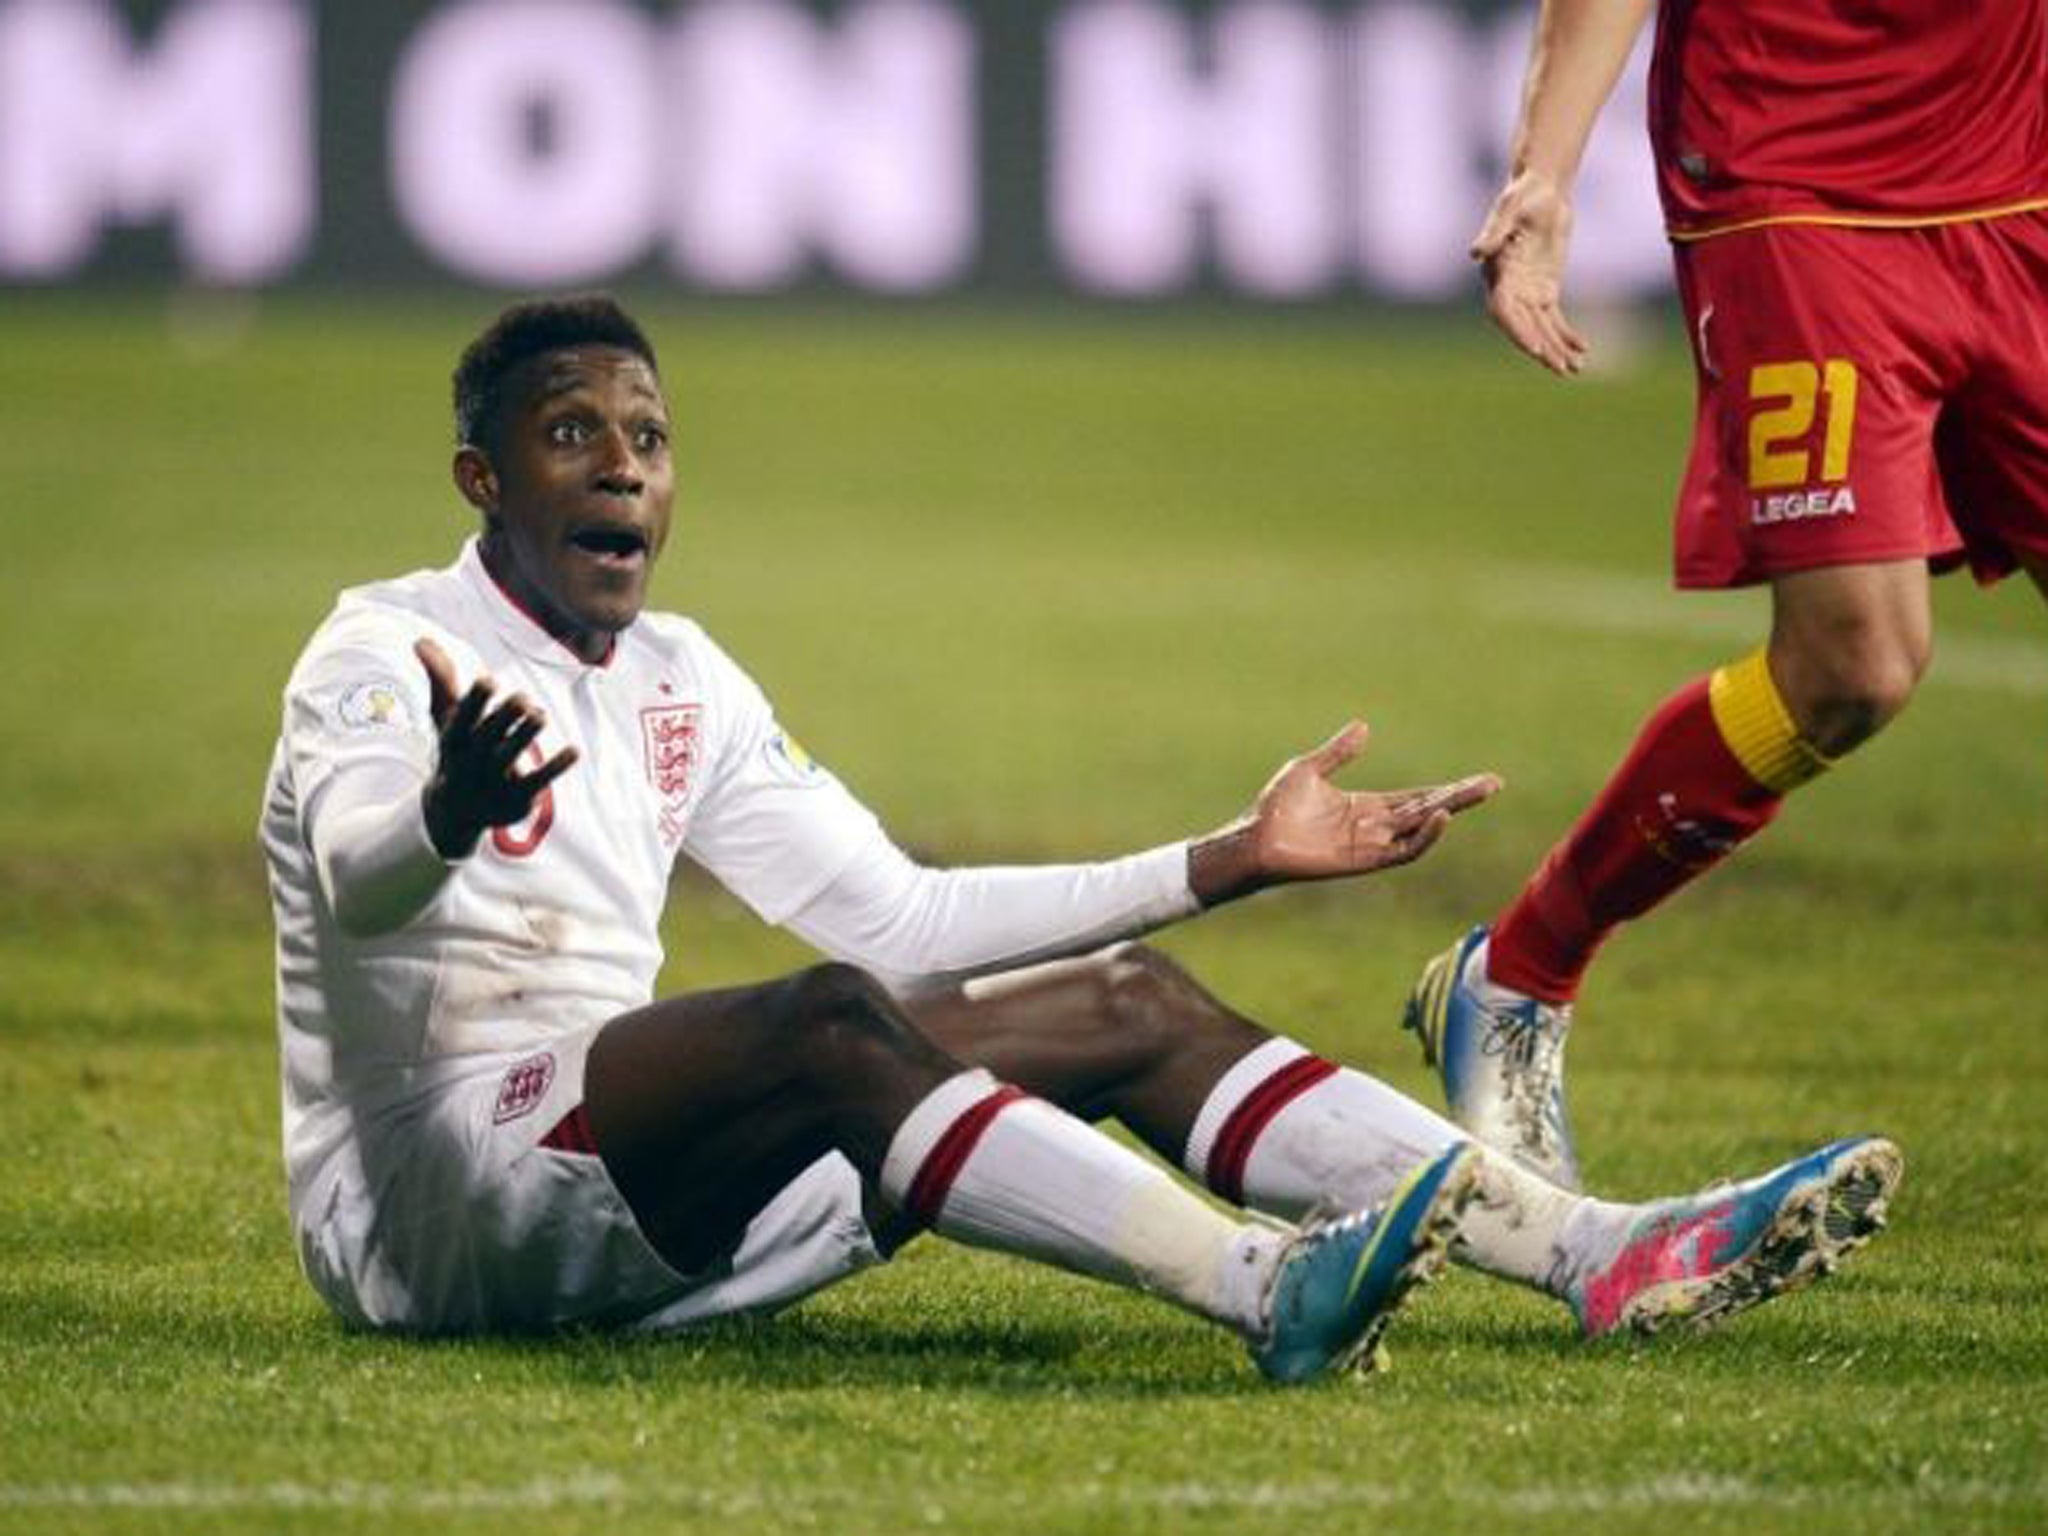 Danny Welbeck tumbled in the box during the first half